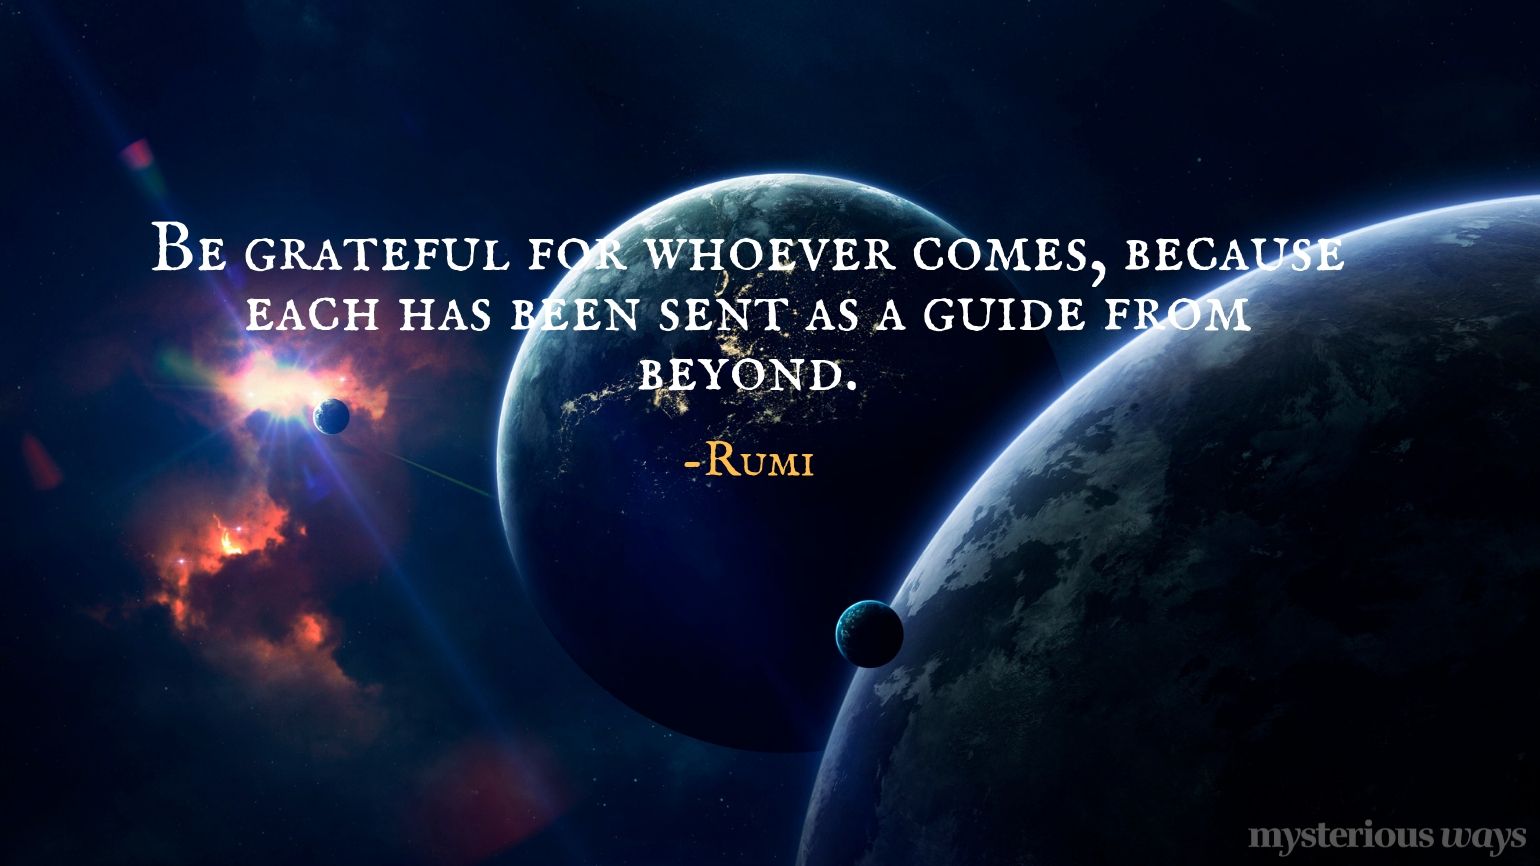 Be grateful for whoever comes, because each has been sent as a guide from beyond. —Rumi